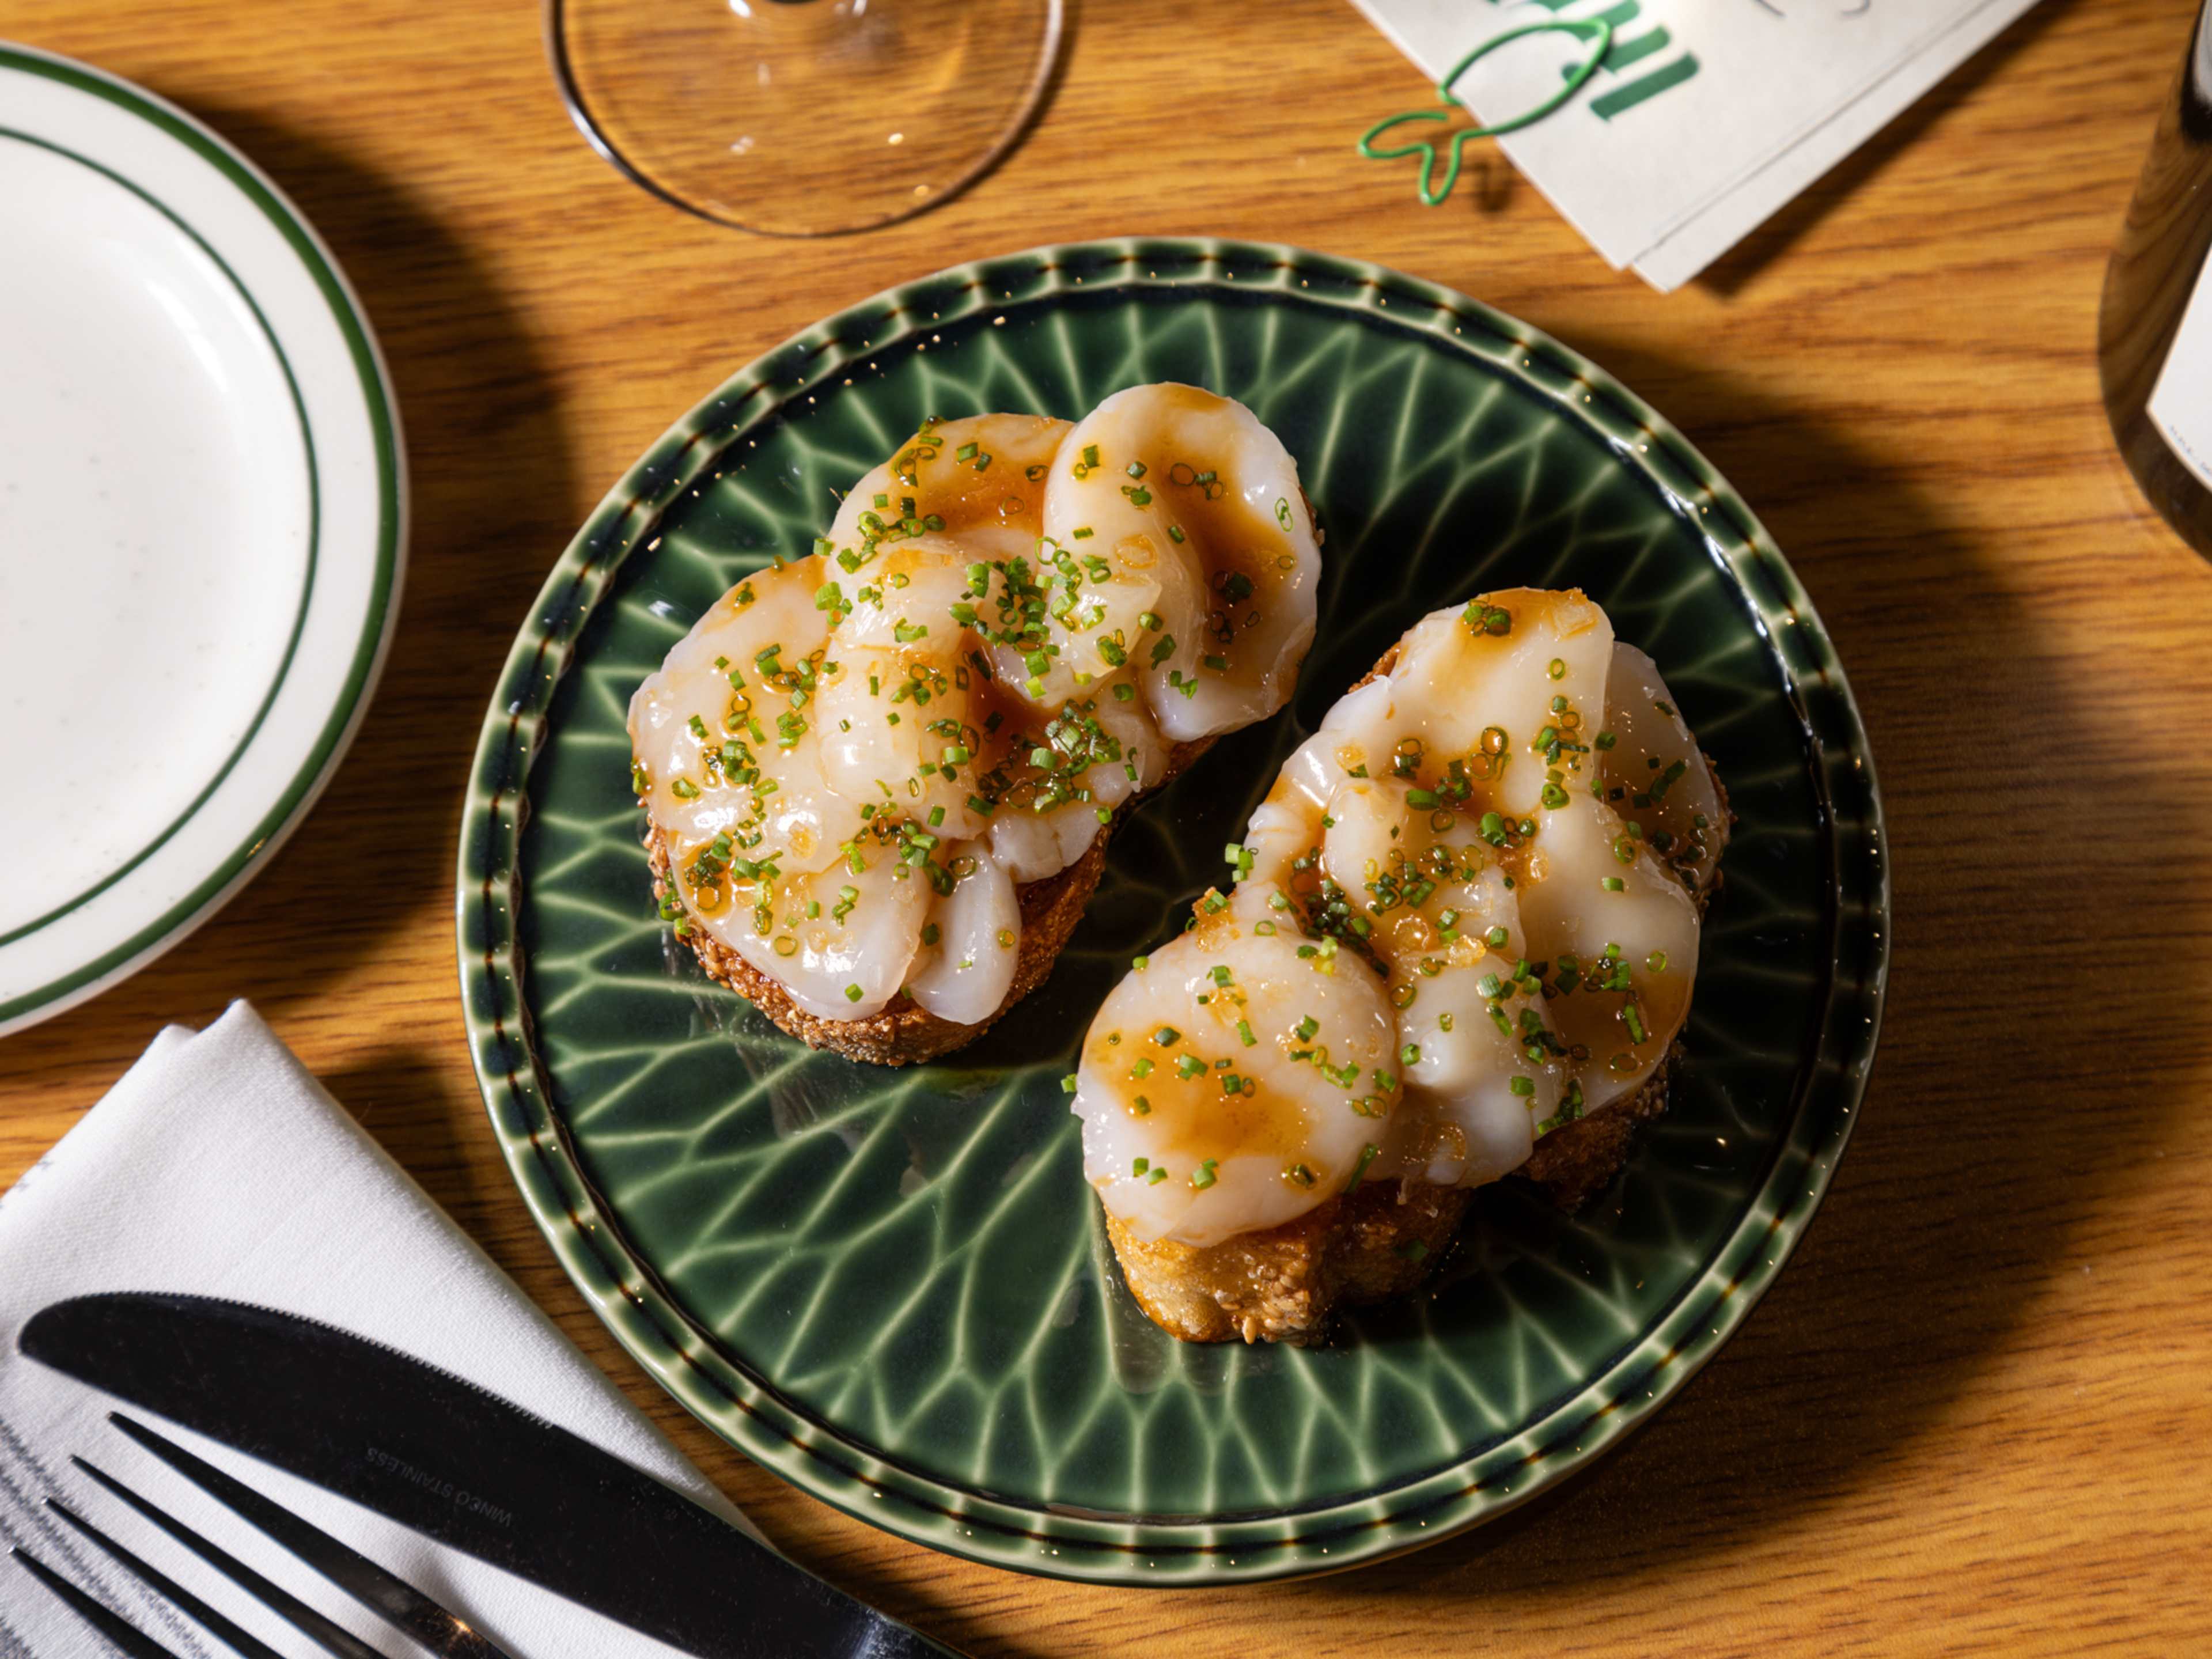 This is the scallop toast from Little Fish.